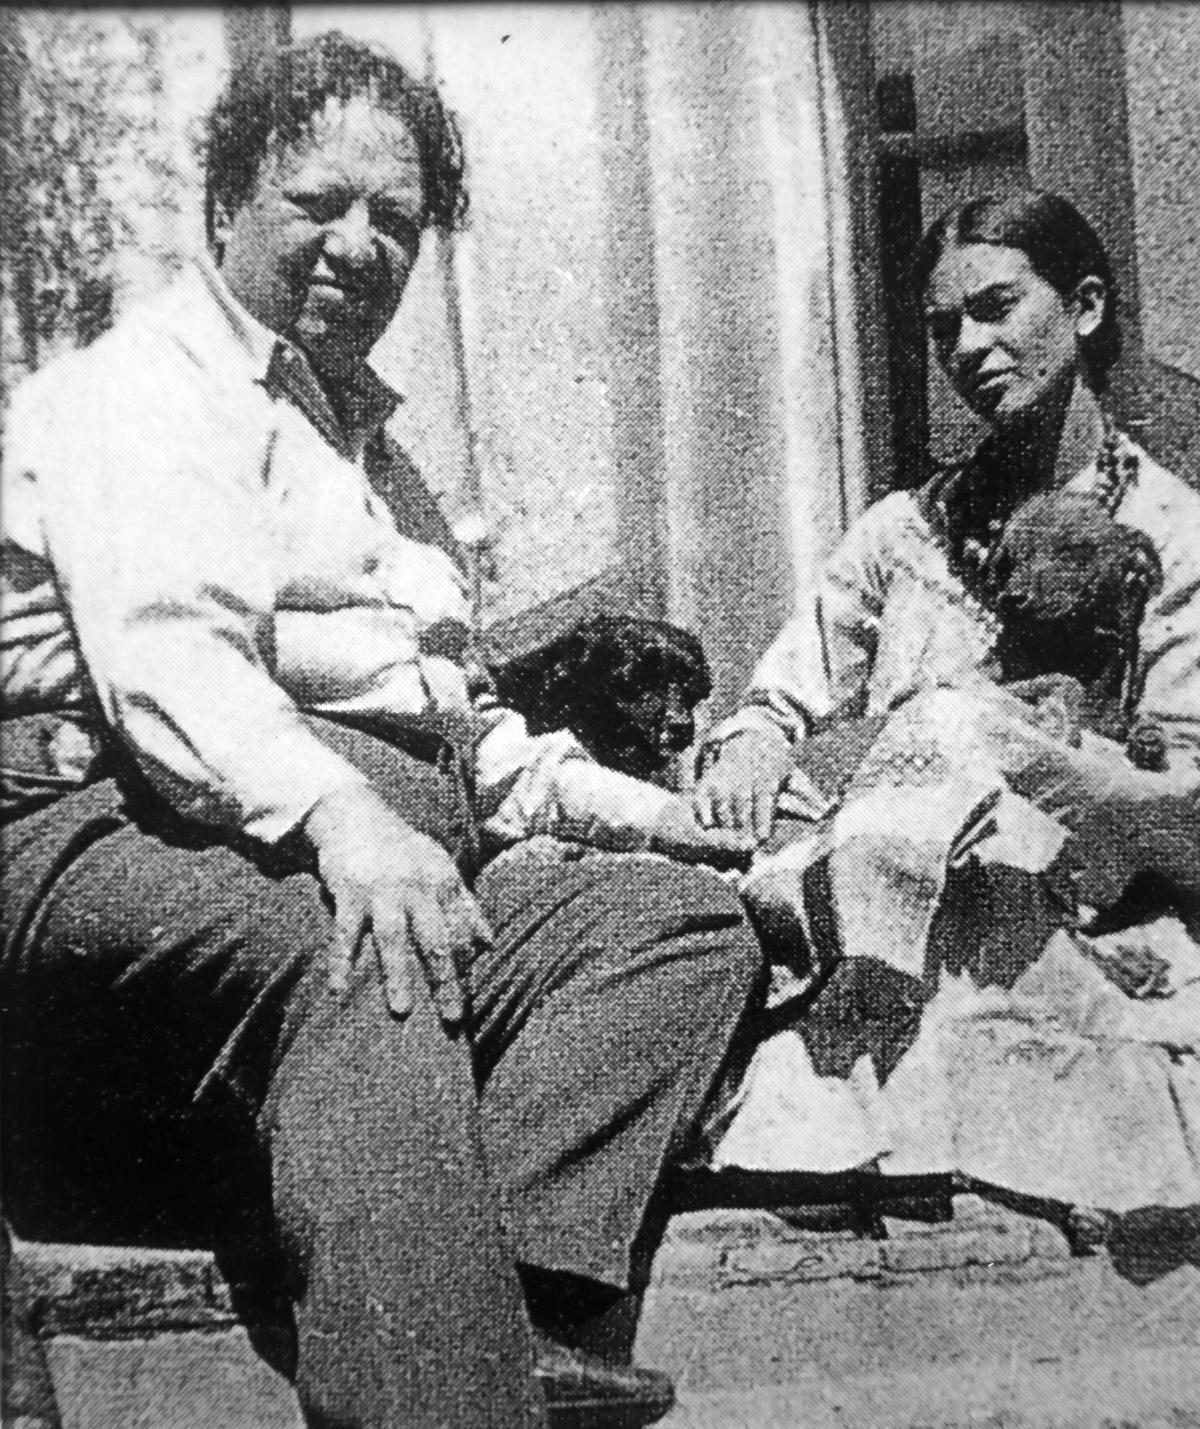 Diego Rivera and Frida Kahlo with their xoloitzcuintles dogs, in the Blue House